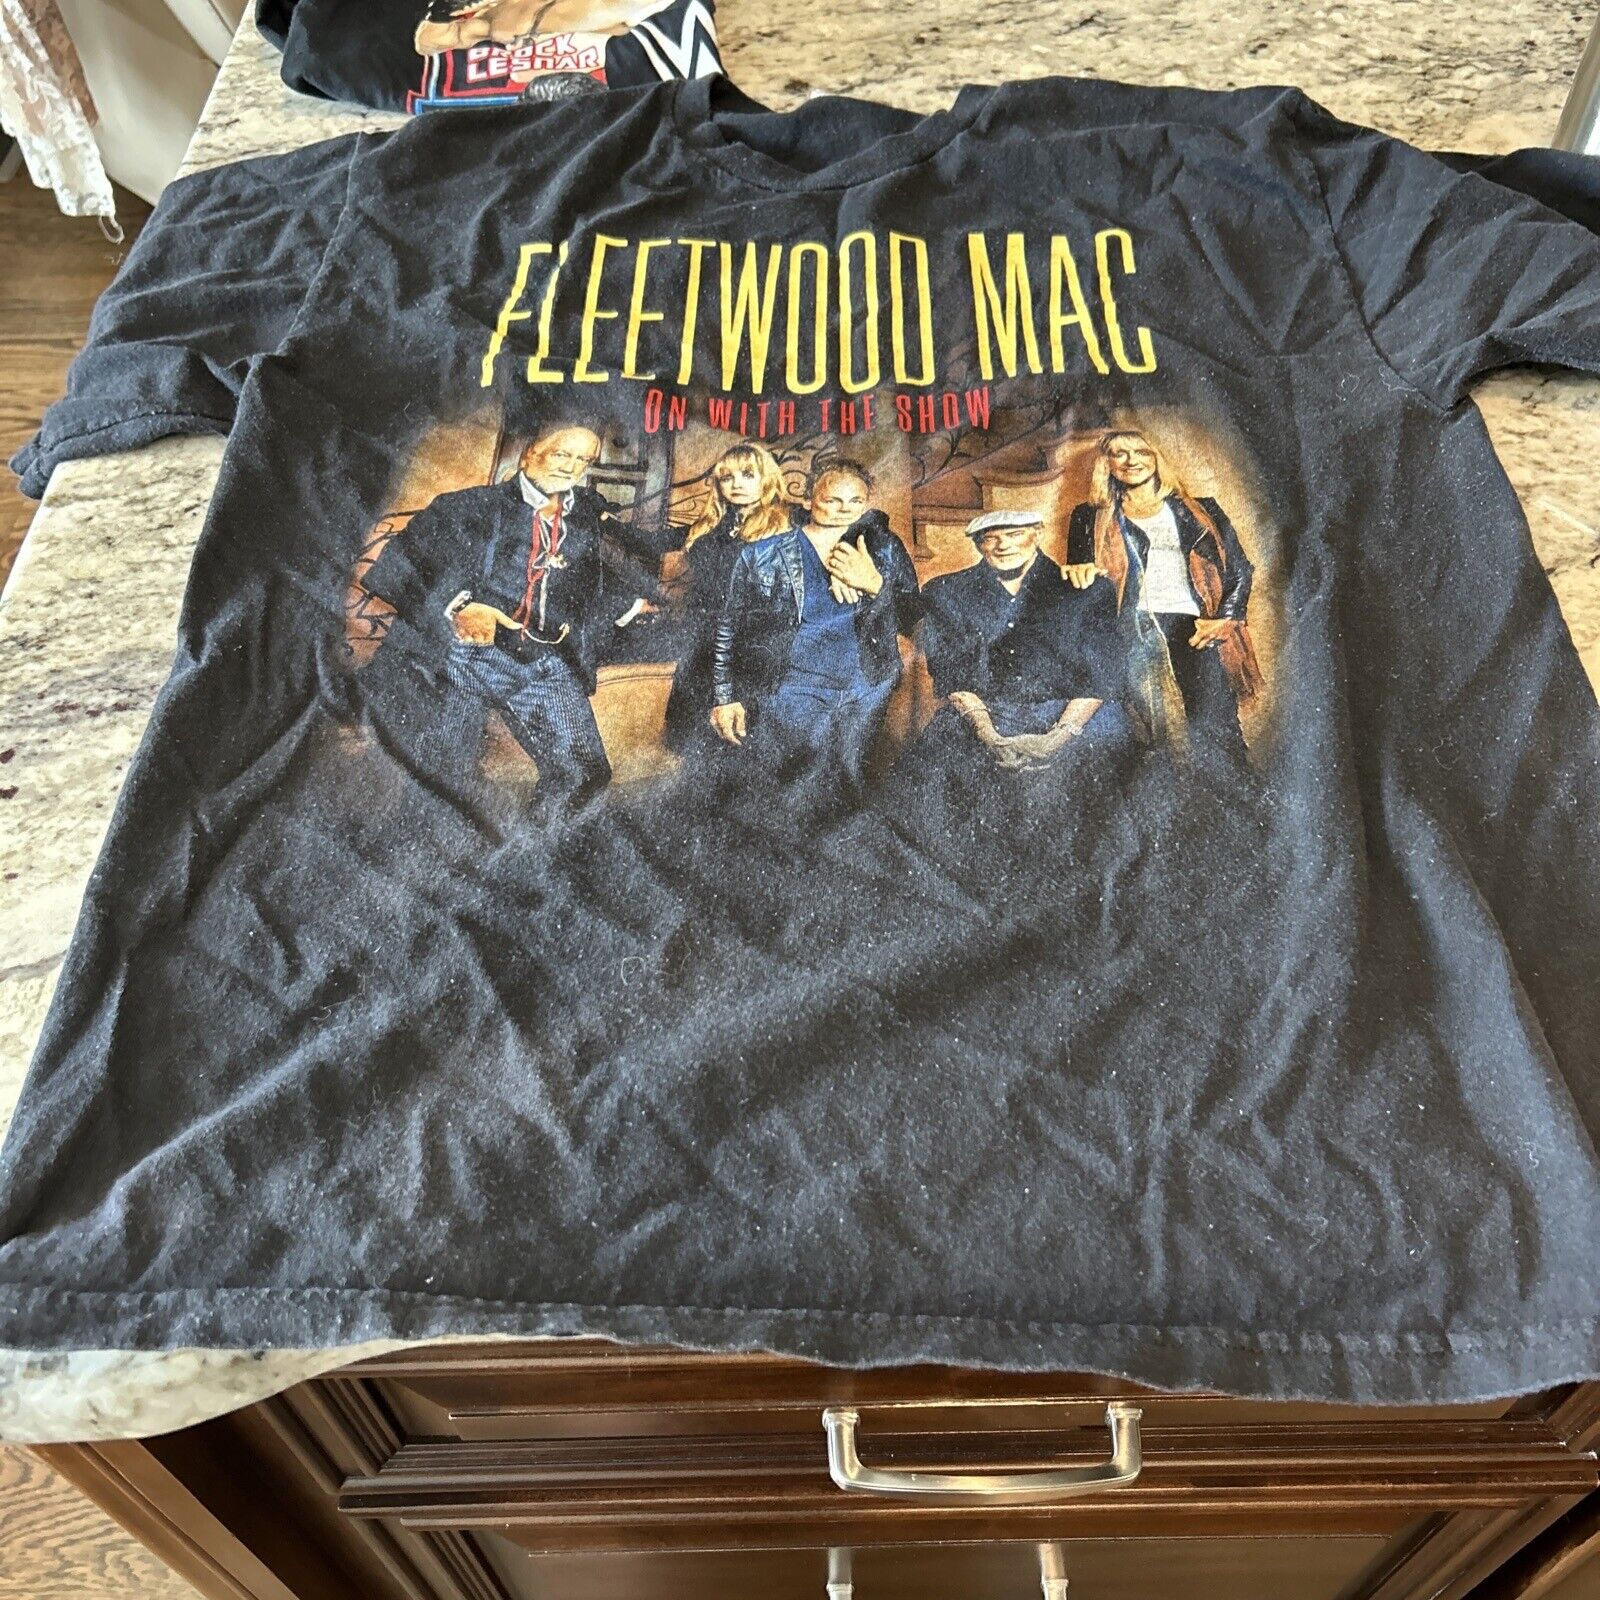 Fleetwood Mac World Tour 2014 2015 On With The Show Concert T-Shirt Black Large